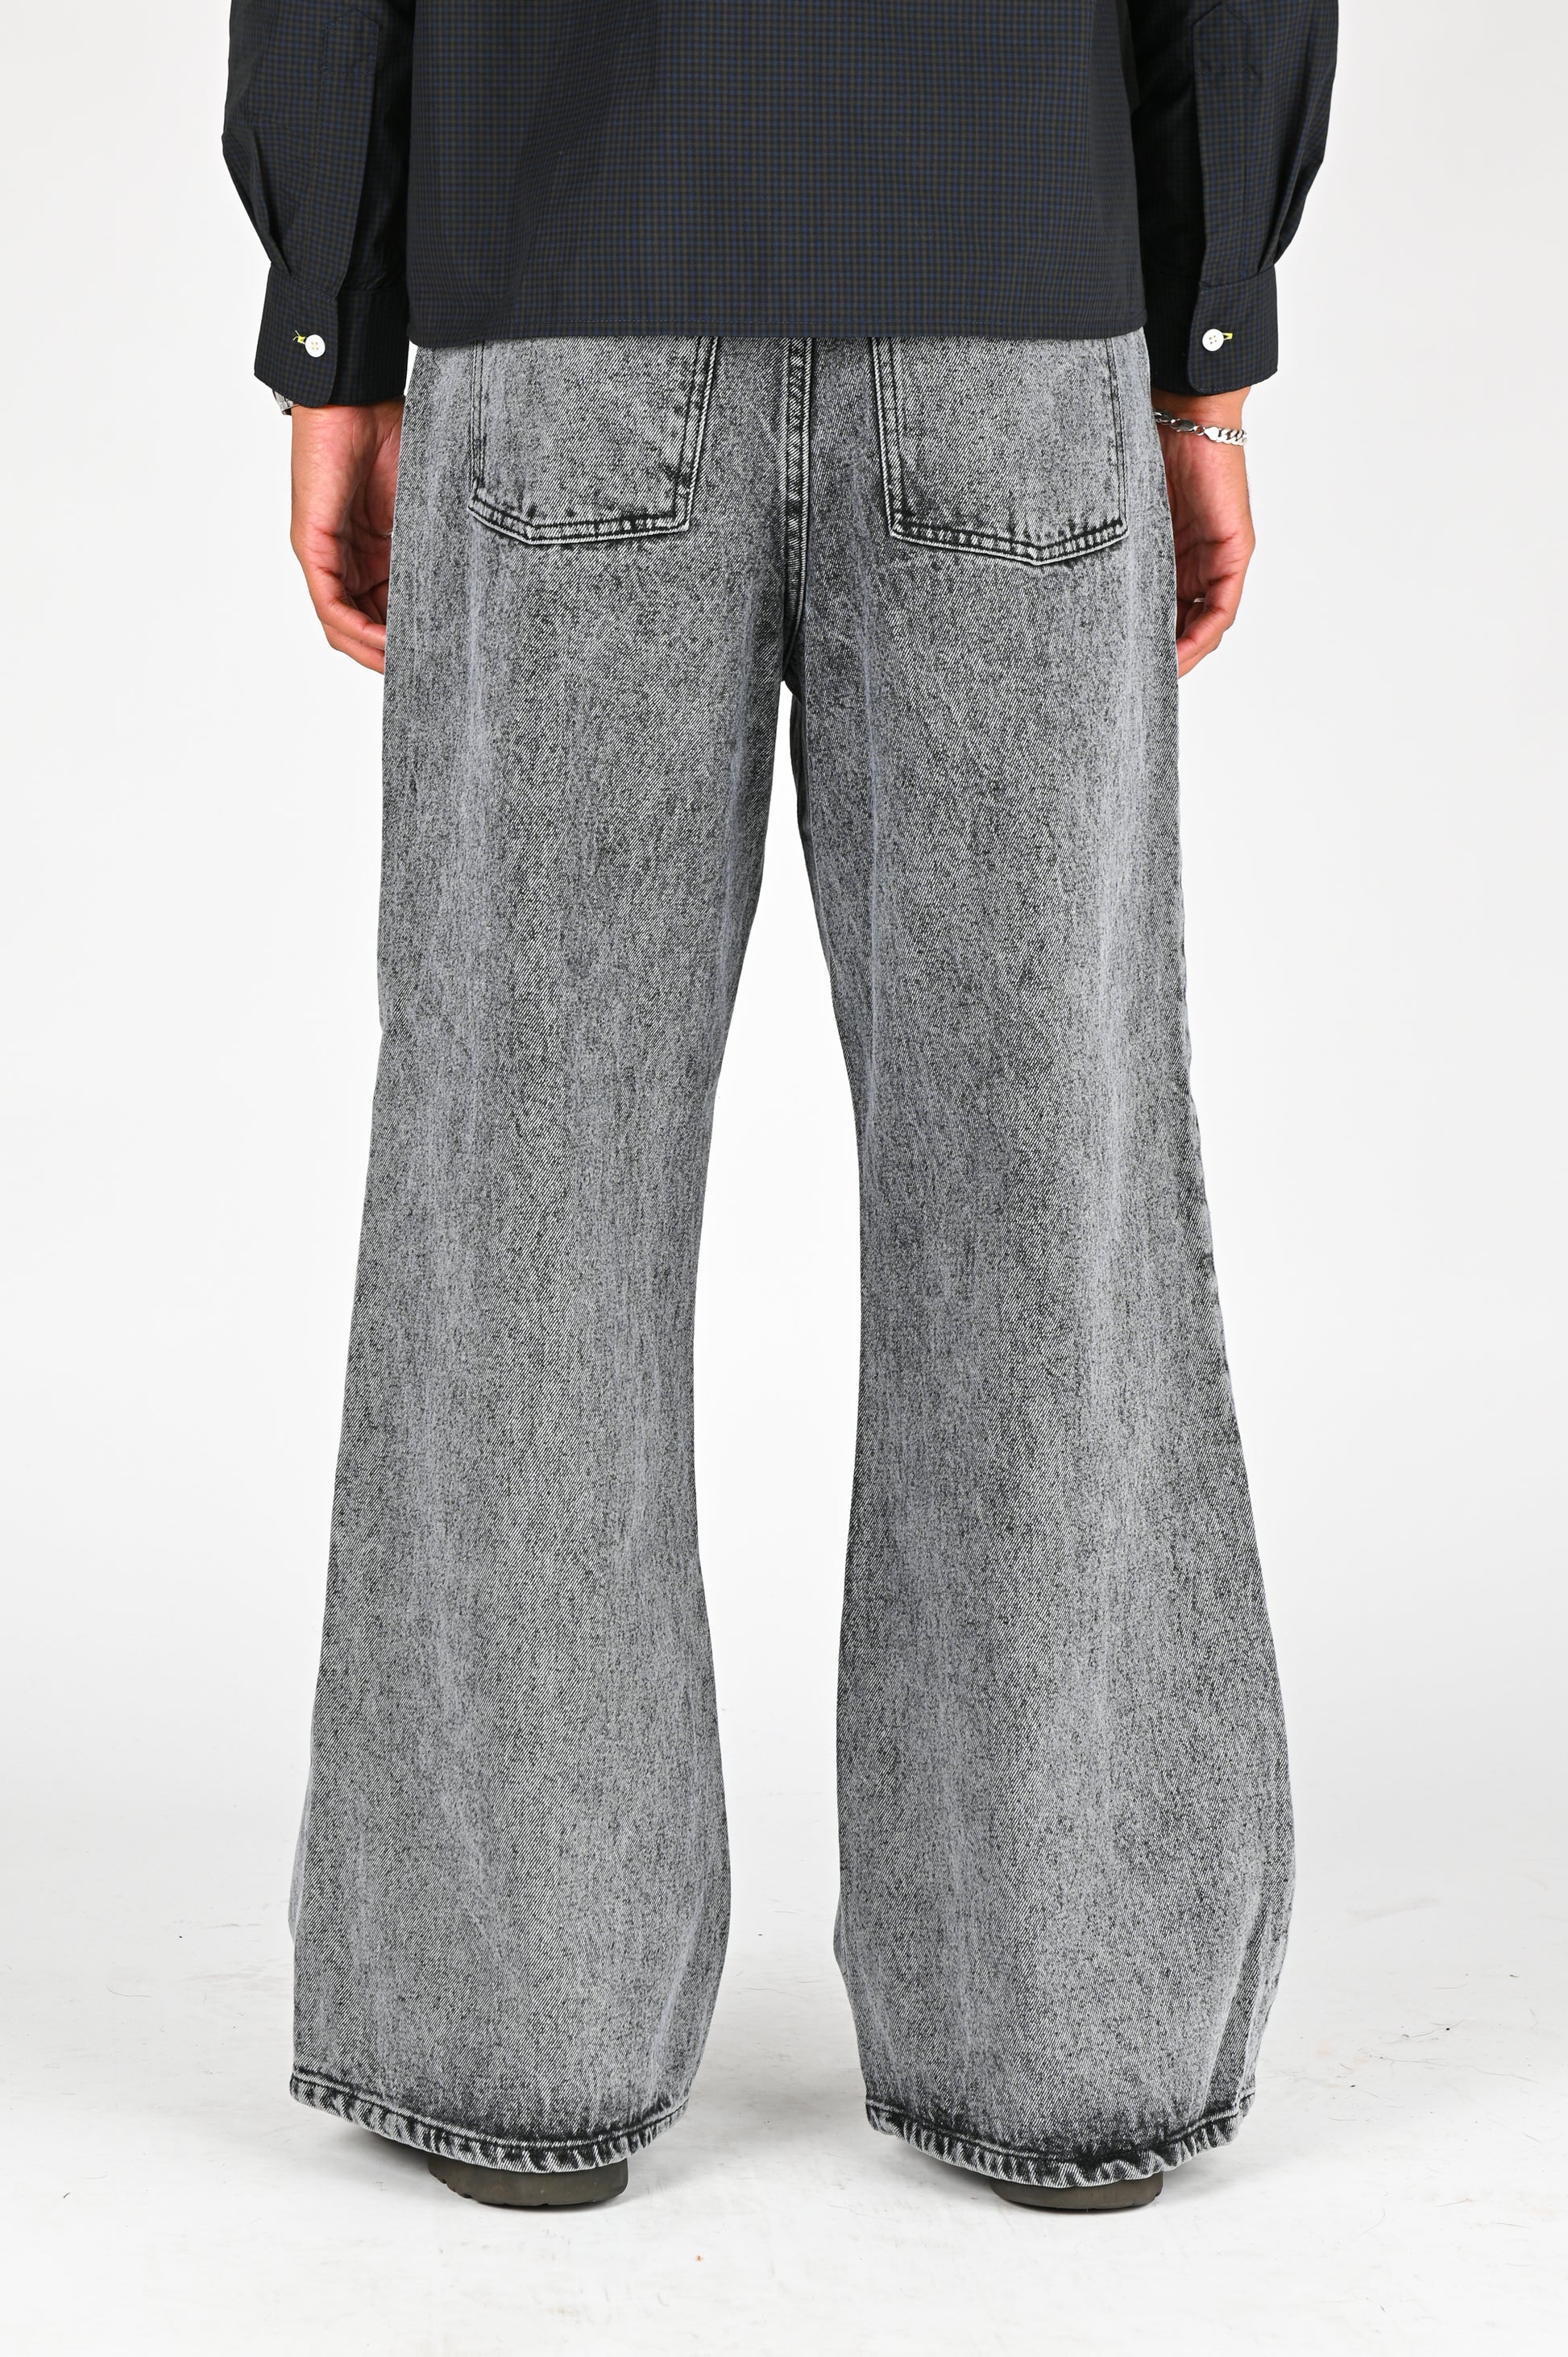 Pseushi Baggy Jeans in Acid Wash